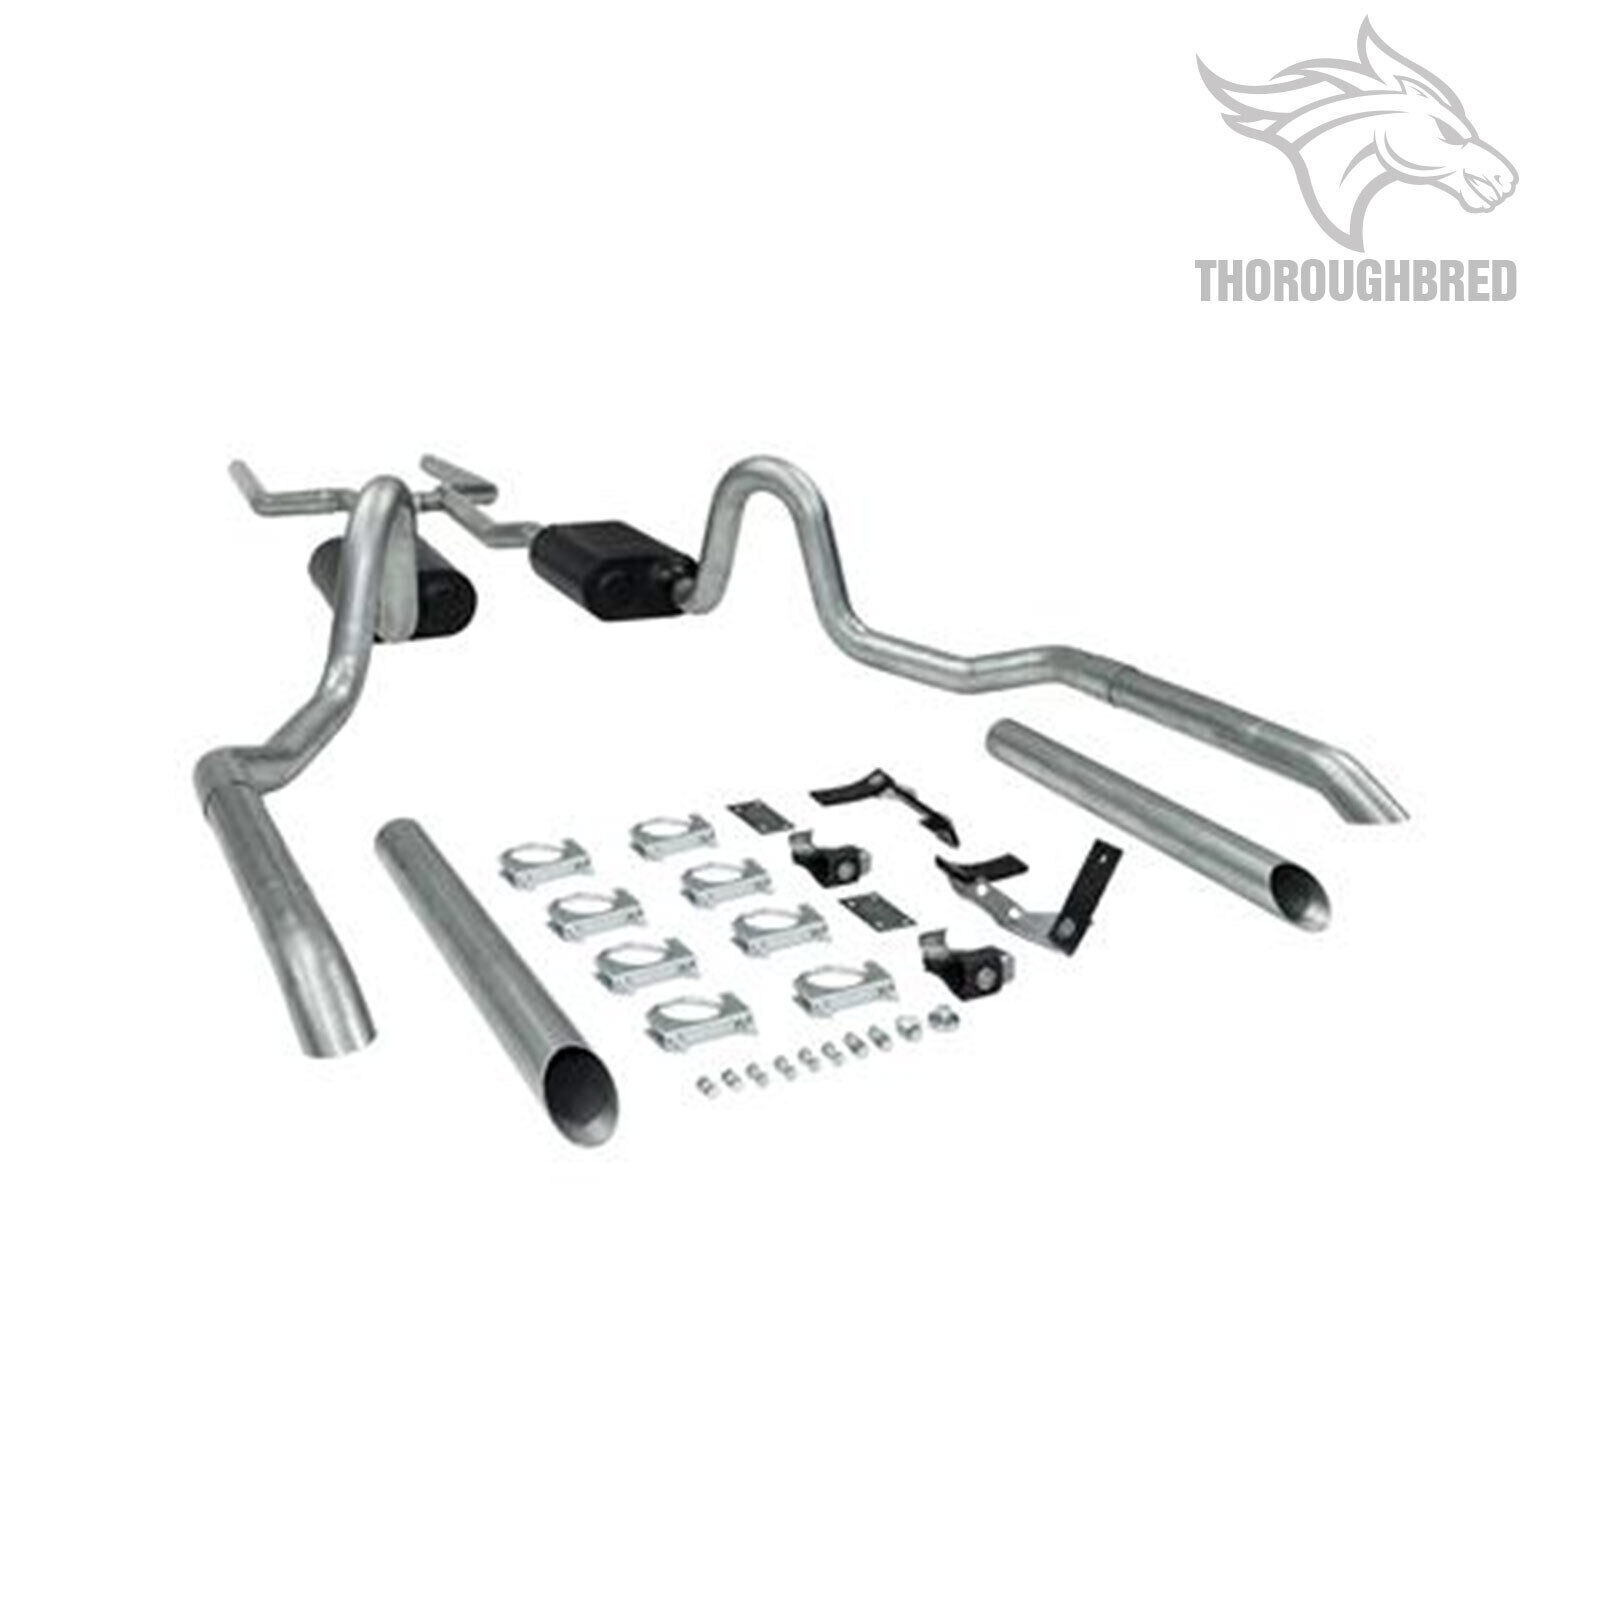 Flowmaster 17119 Header-Back Exhaust System for Chevelle/Tempest/GTO